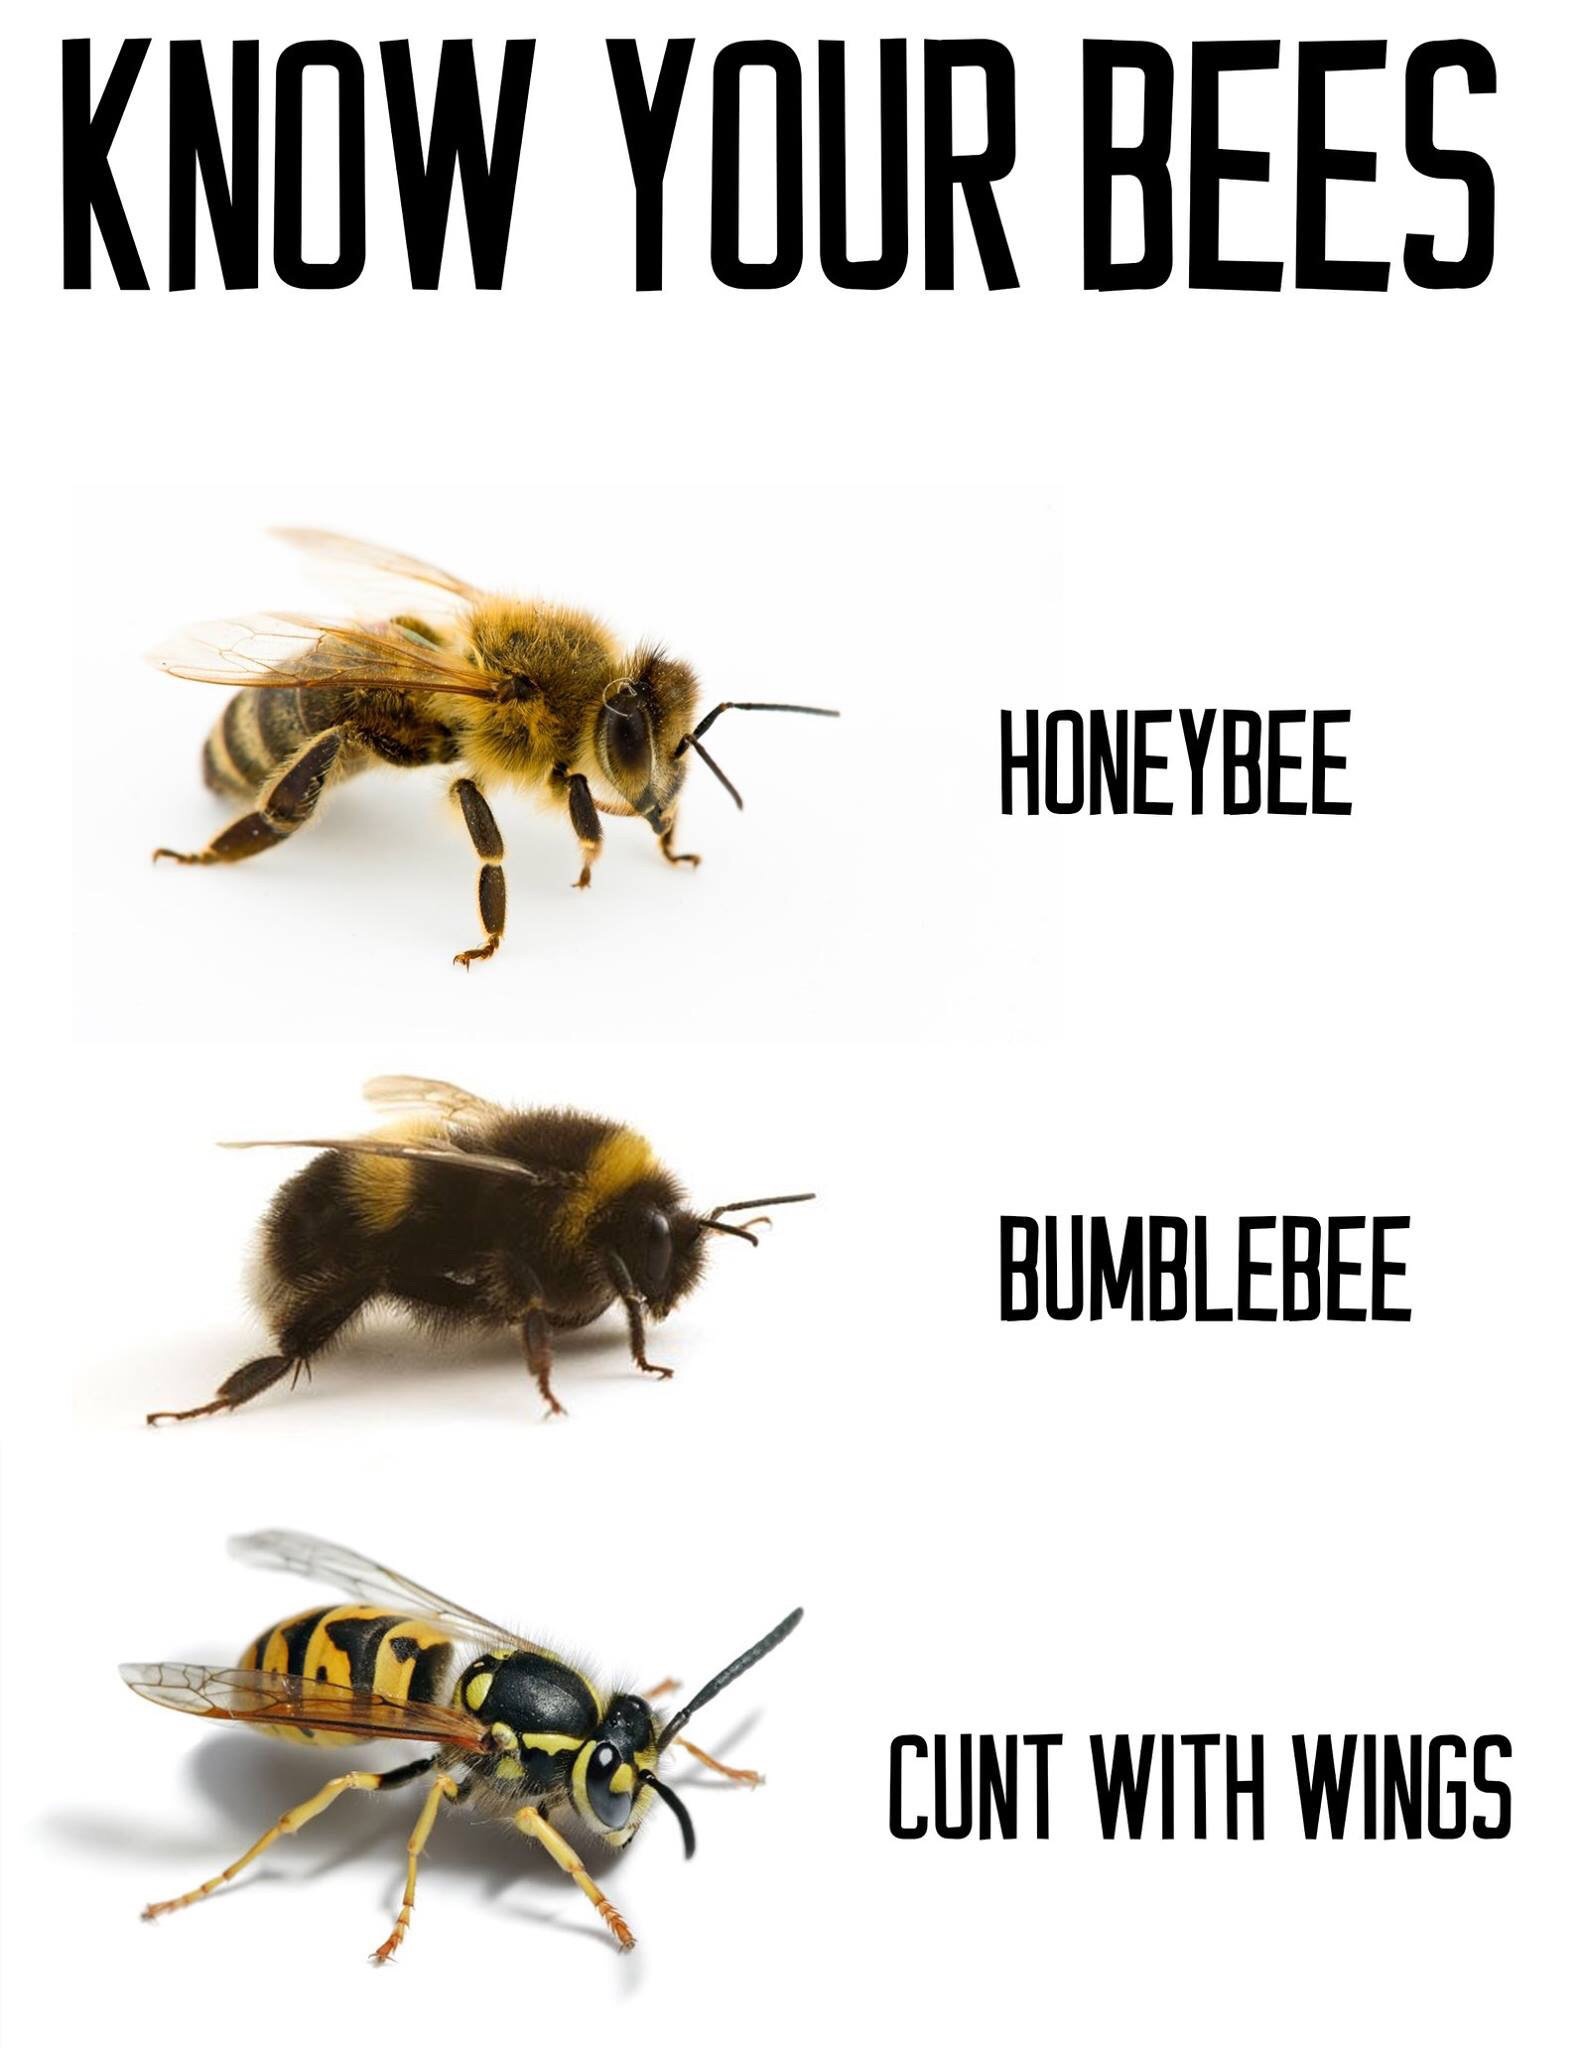 memes - bee memes - Know Your Bees Honeybee Bumblebee Cunt With Wings